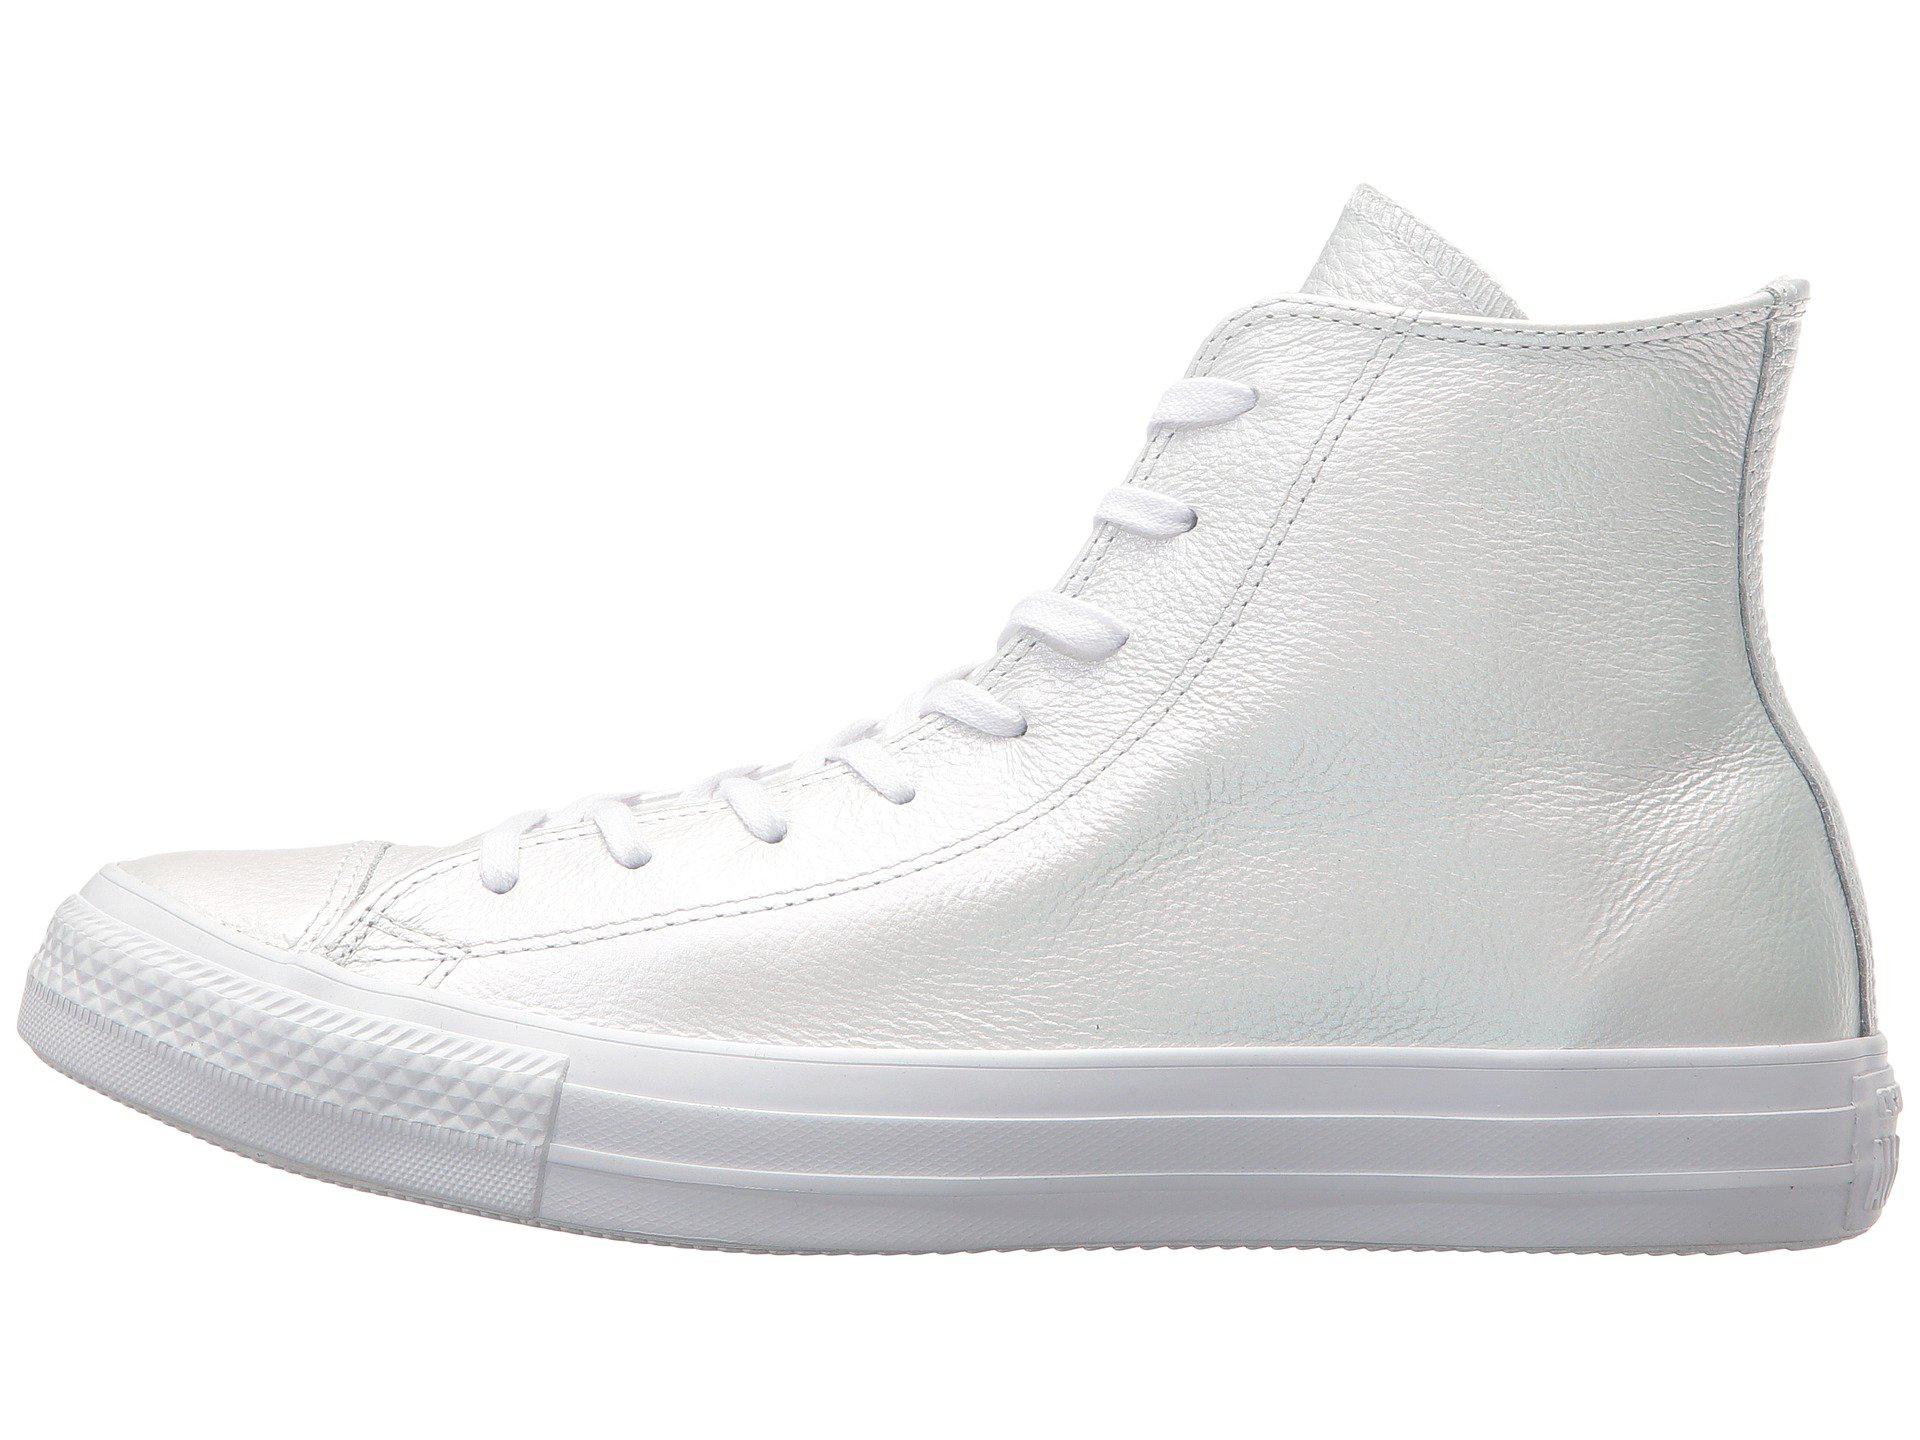 Converse Chuck Taylor® All Star® Iridescent Leather Hi in White - Lyst